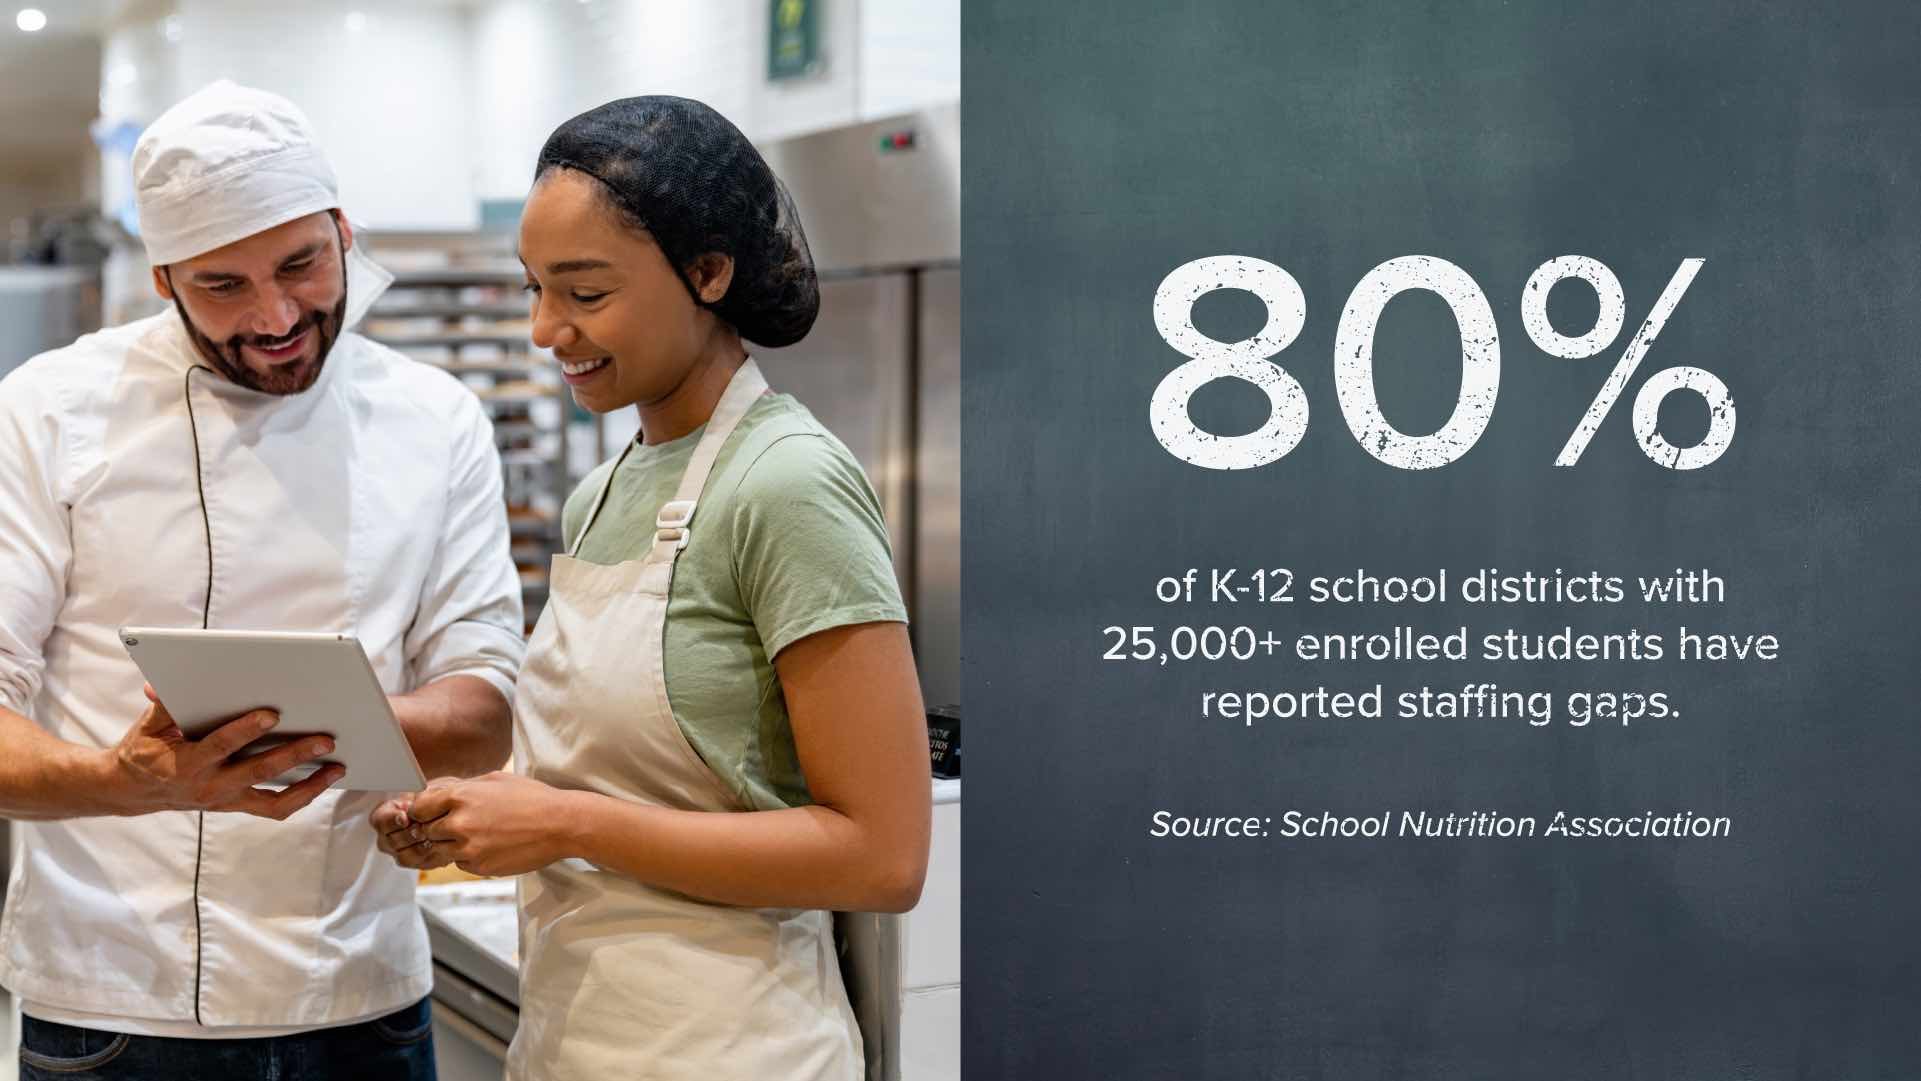 80% of K-12 school districts with 25,000+ enrolled students have reported staffing gaps